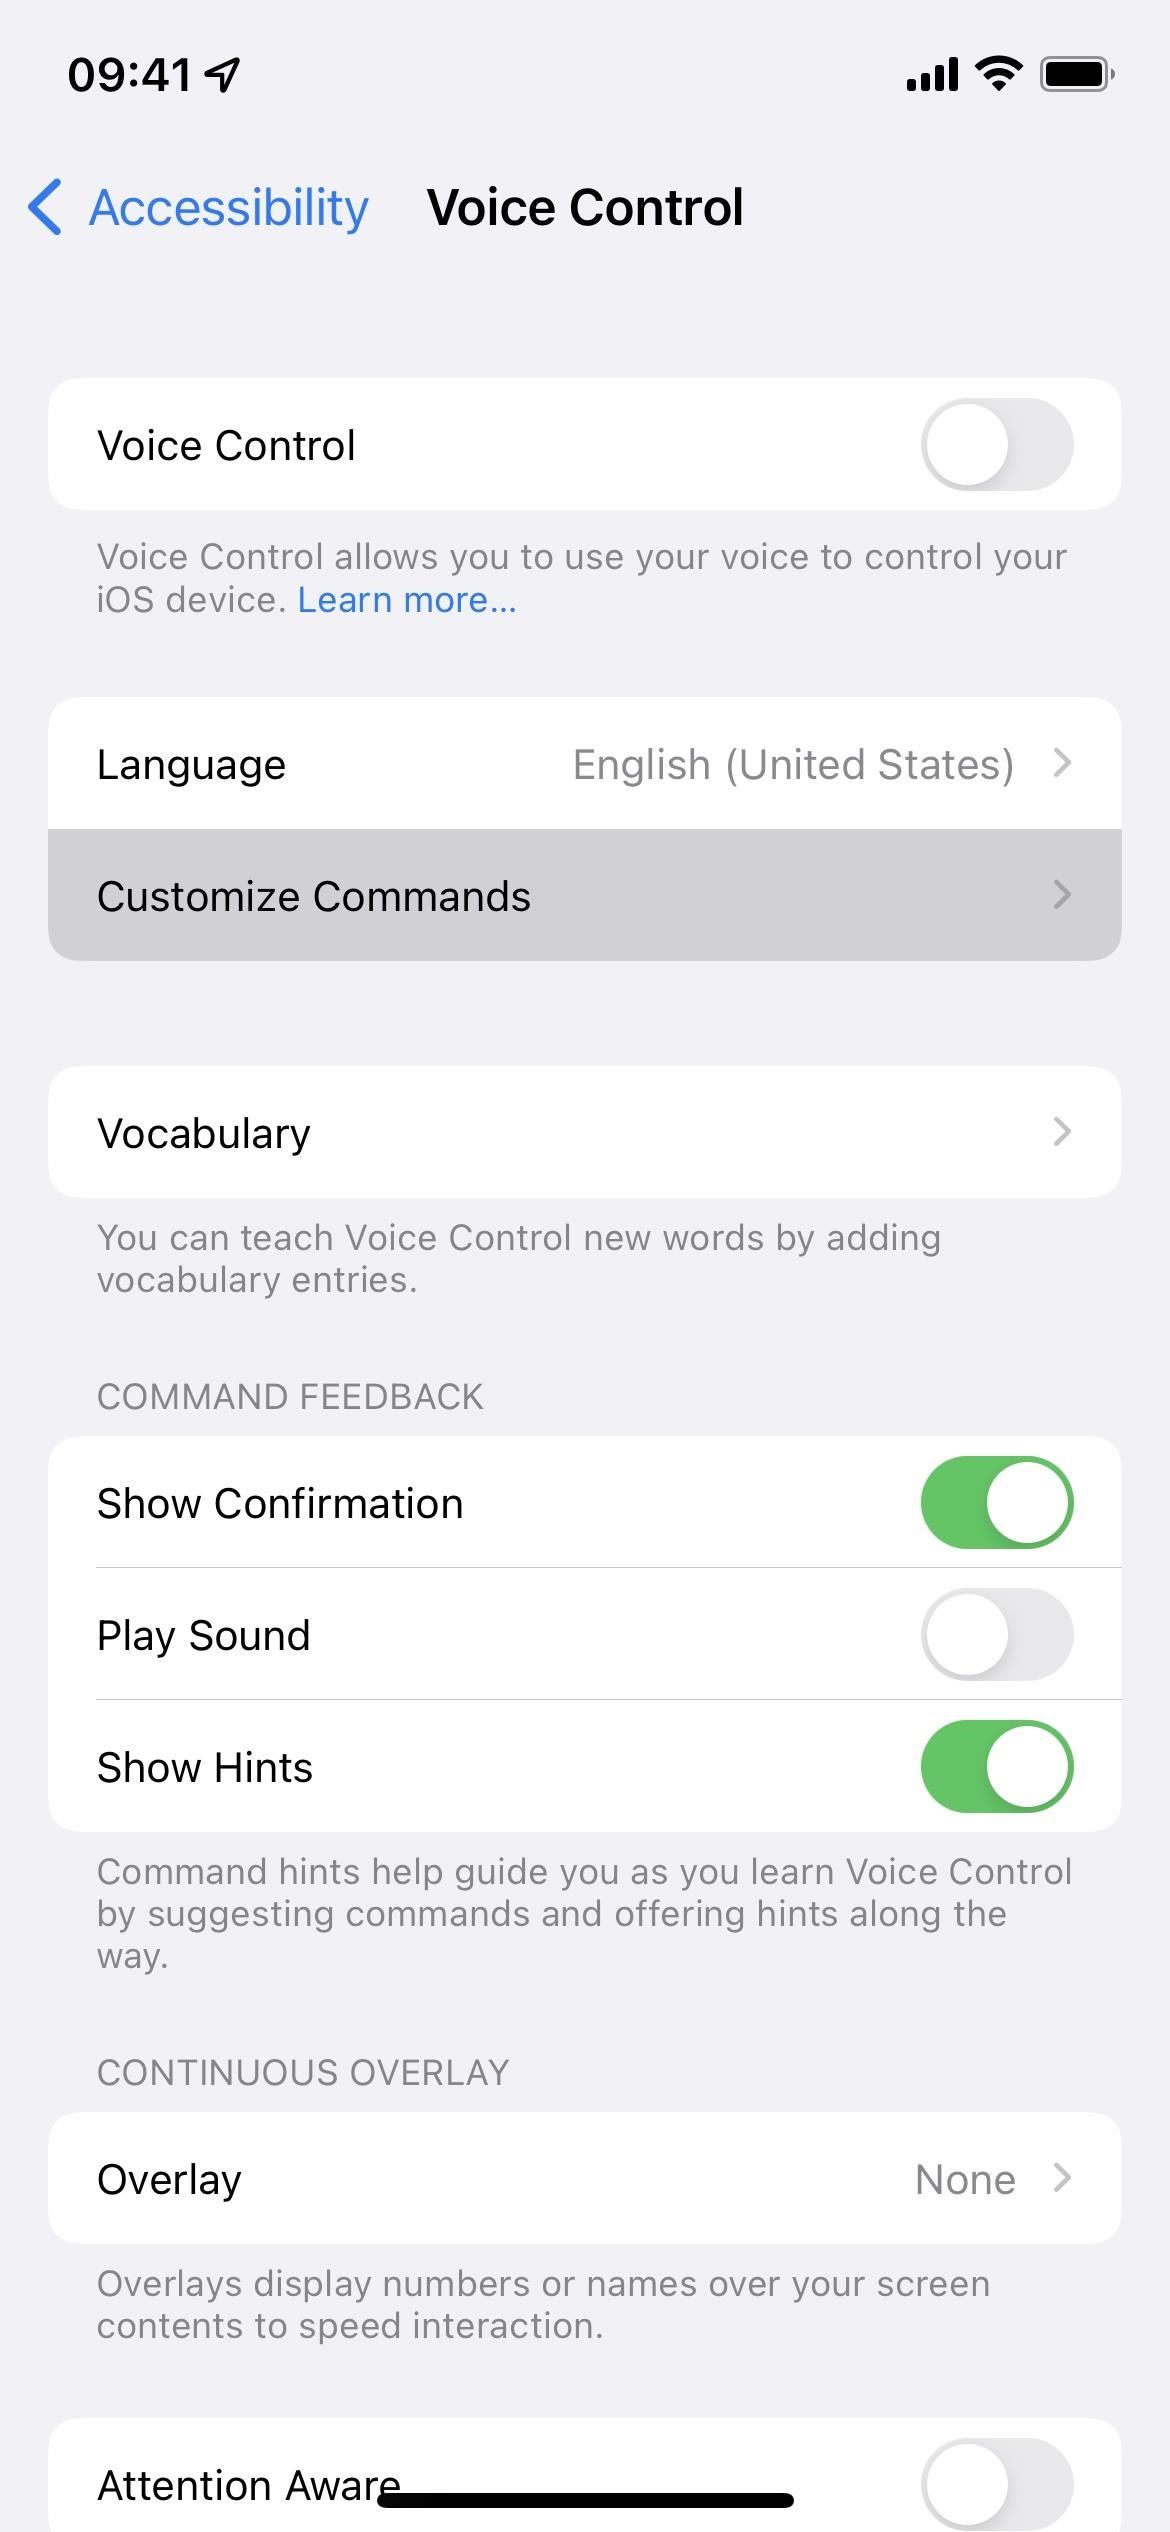 Scroll Through TikTok Hands-Free on Your iPhone or iPad Using Simple Voice Commands